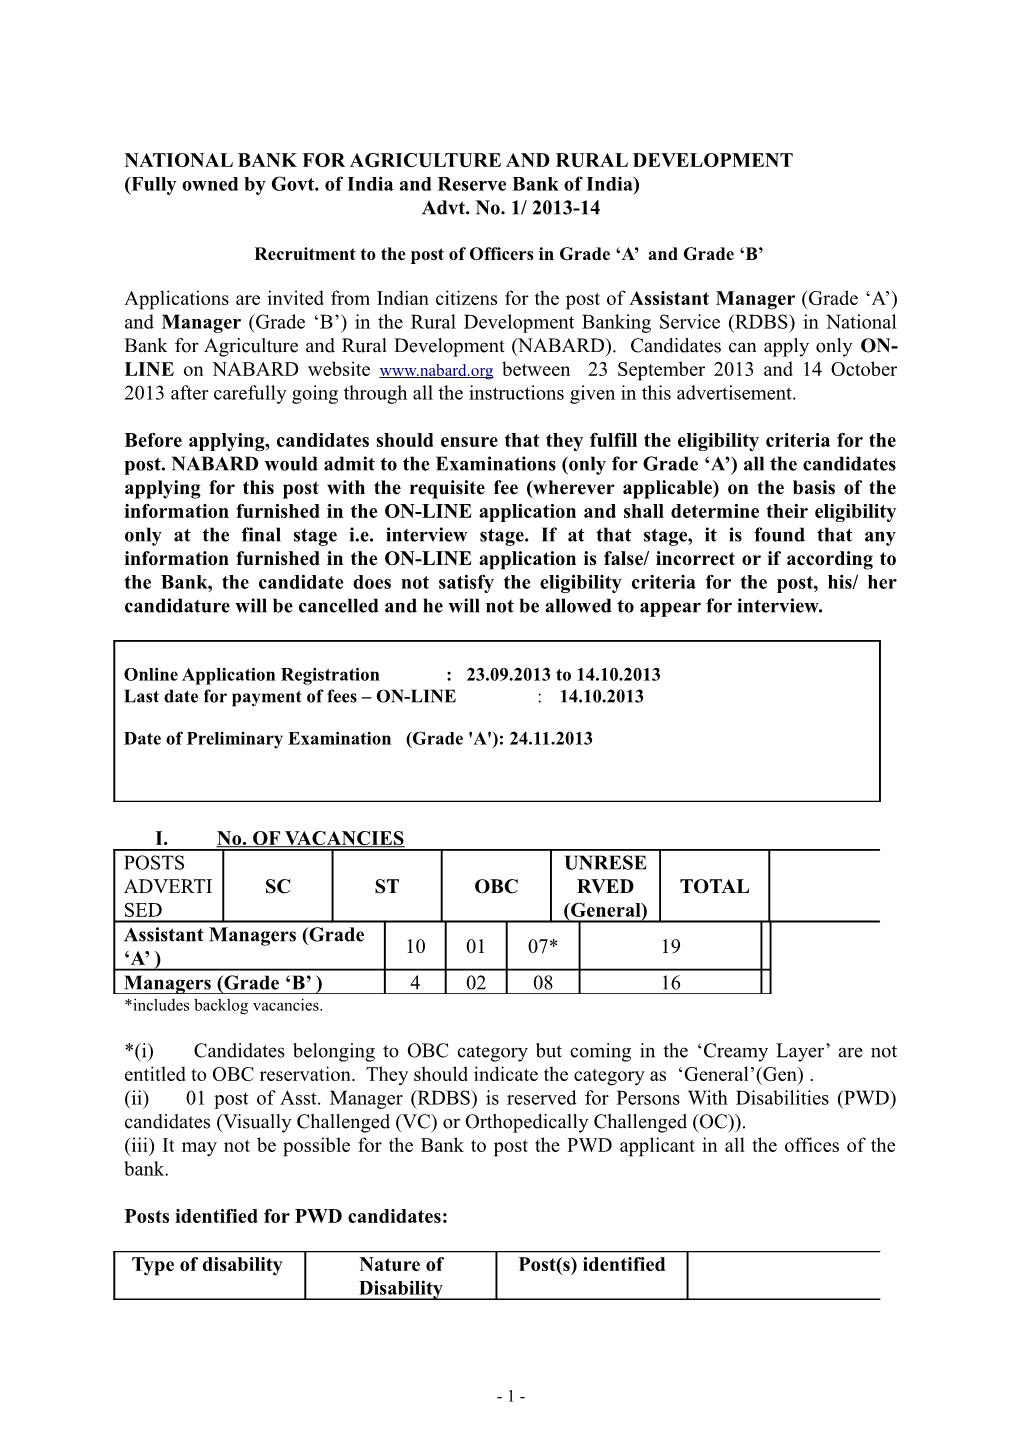 Recruitment to the Post of Officers in Grade a and Grade B